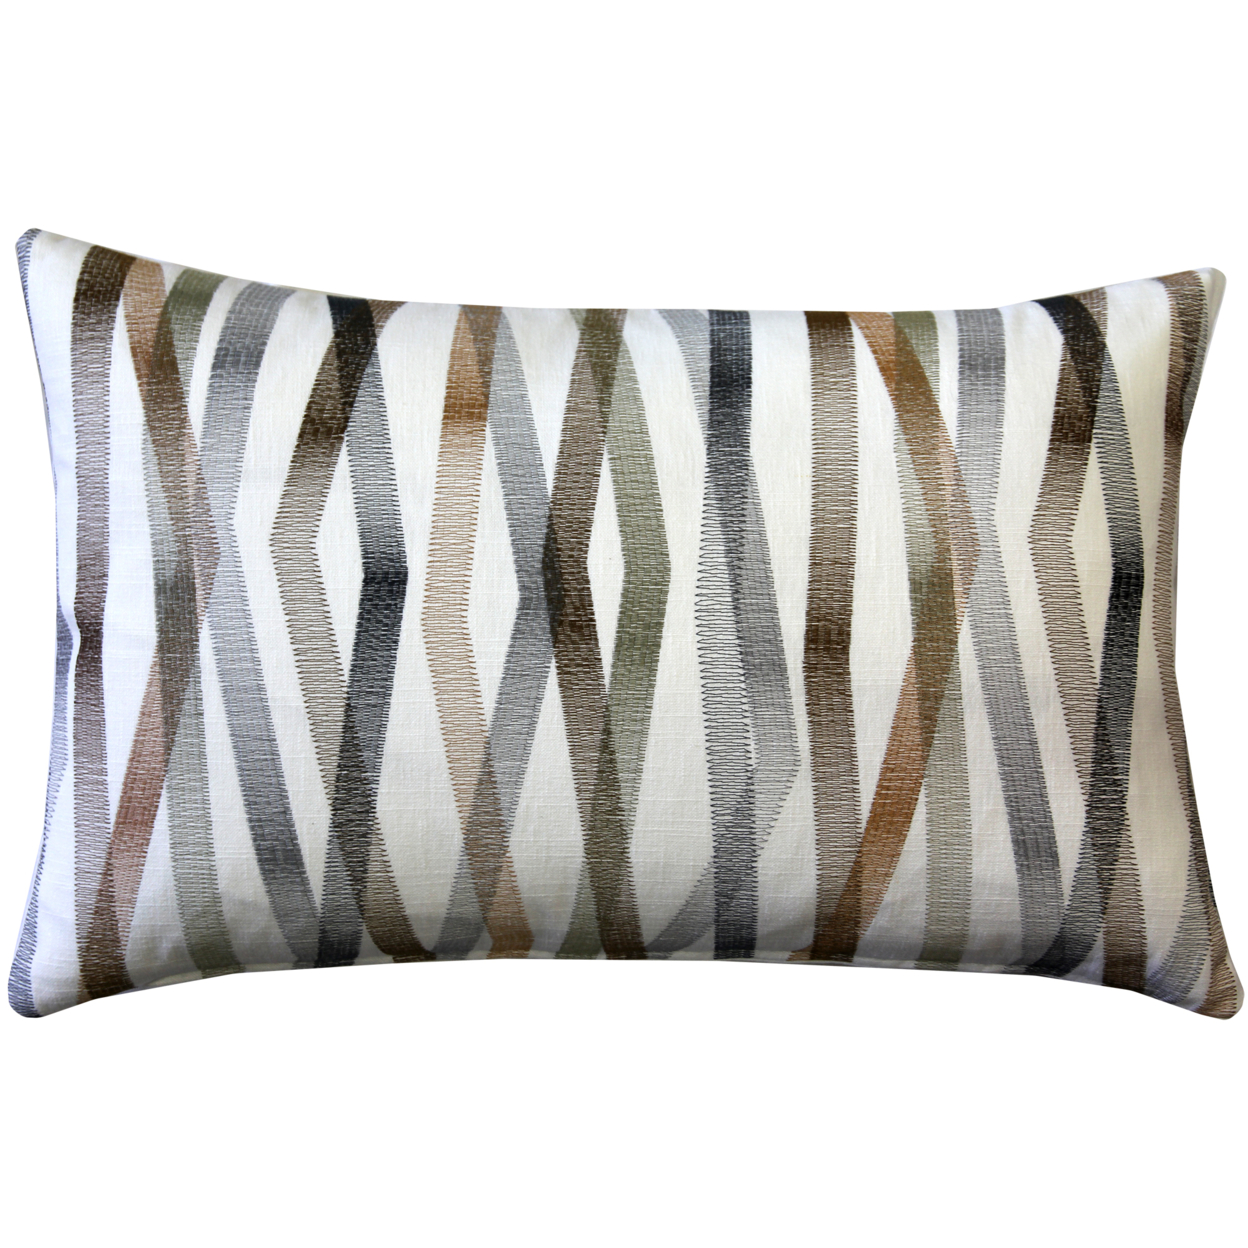 Wandering Lines Forest Grove Throw Pillow 14x24 Inches Square, Complete Pillow With Polyfill Pillow Insert